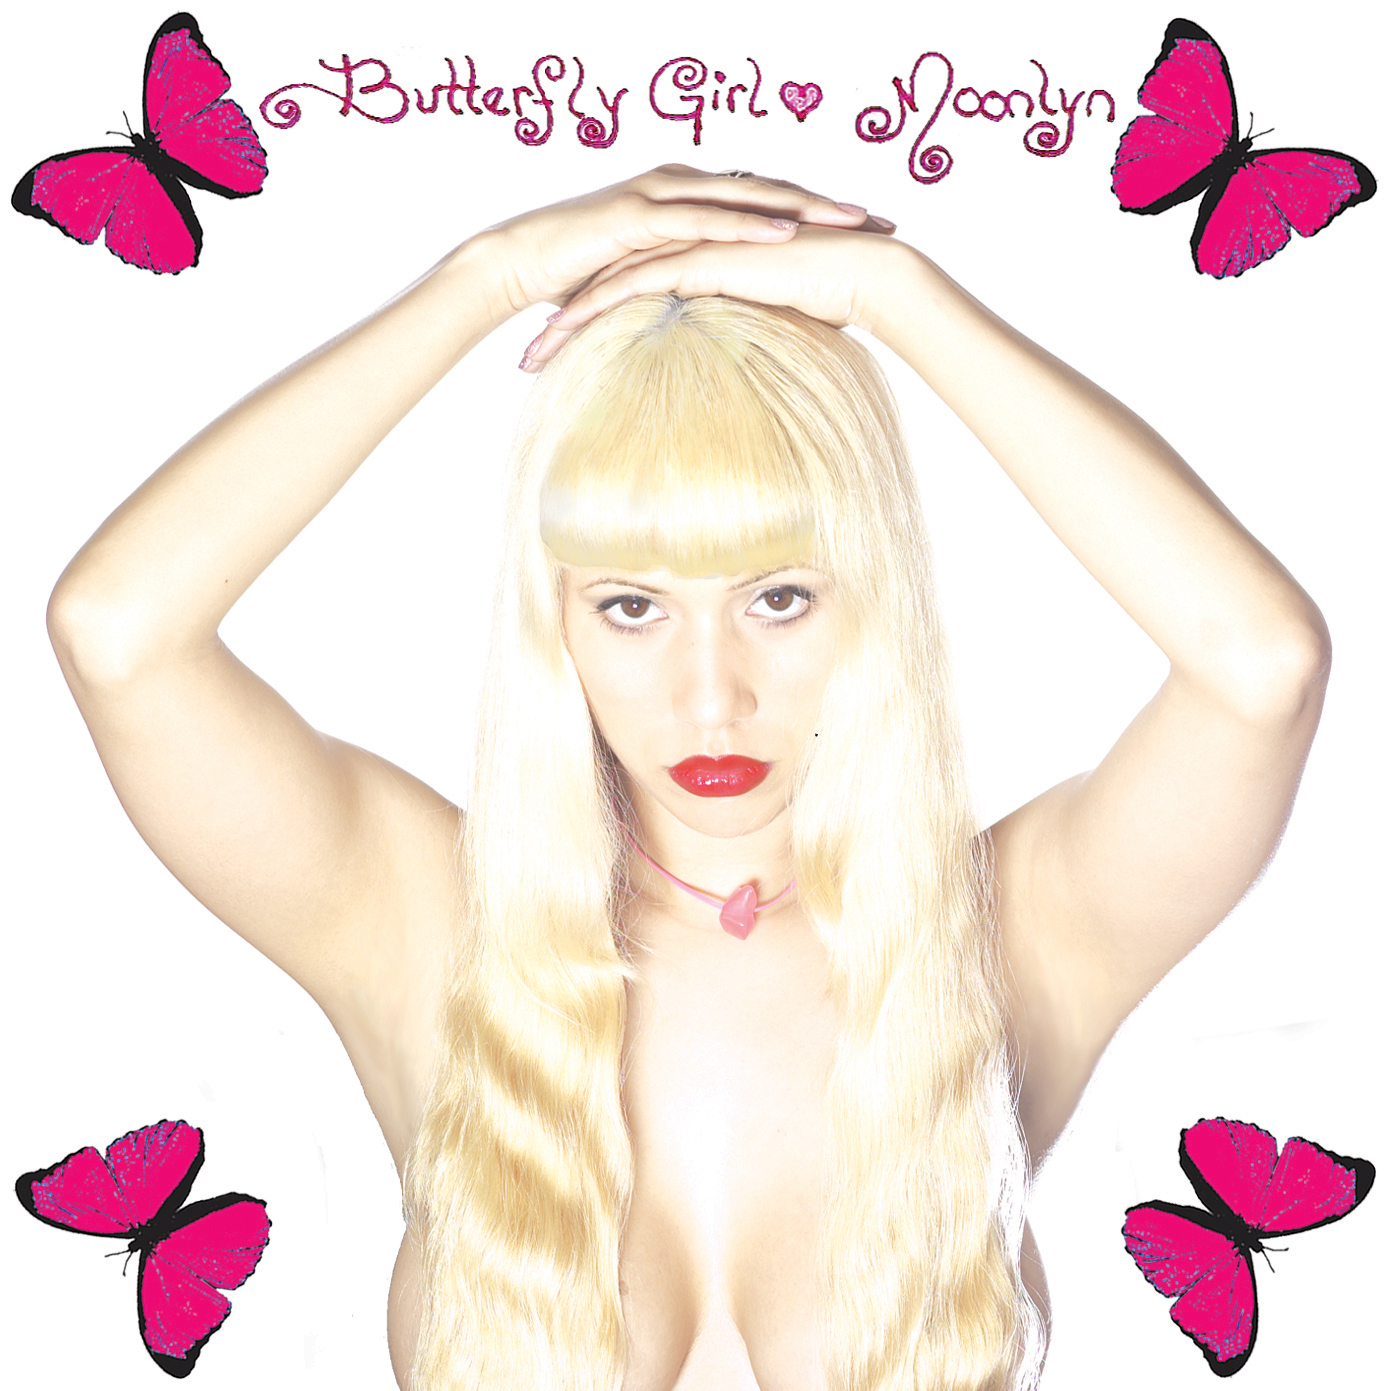 Butterfly_Girl_Album_Cover.jpg Moonlyn, Moonlyn Music, Moonlyn's official website, Moonlyn, Moonlyn website, Blondes Prefer Gentlemen, Butterfly Girl, Moonlyn, Butterfly Girl song, Butterfly Girl album, Butterfly Girl music, Moonlyn music, indie artist, toronto indie artist, singer, songwriter, producer, songstress, alternative pop, electro shock, electronica, electro pop, rock, independent musical artist, blondes prefer gentlemen, X'd My Mind, When You Crossed My Mind, Marilyn Monroe, I Wanna Be Loved By You, Vampire, Vampyre, Bad Girl, Bad Grrrl, Fille Mchante, Mental, Happy Today, Going Home, Pow!, Fearless, Unreal, Music Man, It's love, I Wish, Moonlyn pic, Moonlyn photo, underground film siren, Toronto diva, blonde bombshell, sexy blonde, girl, long hair fetish, long blonde hair, fetish, girl power, dominant woman, moon music, moon goddess, witch, egyptian queen, isis, nefertiti, high priestess, nude performance, nude Goddess, Goddess, Lady Godiva, Rapunzel, Rusalka